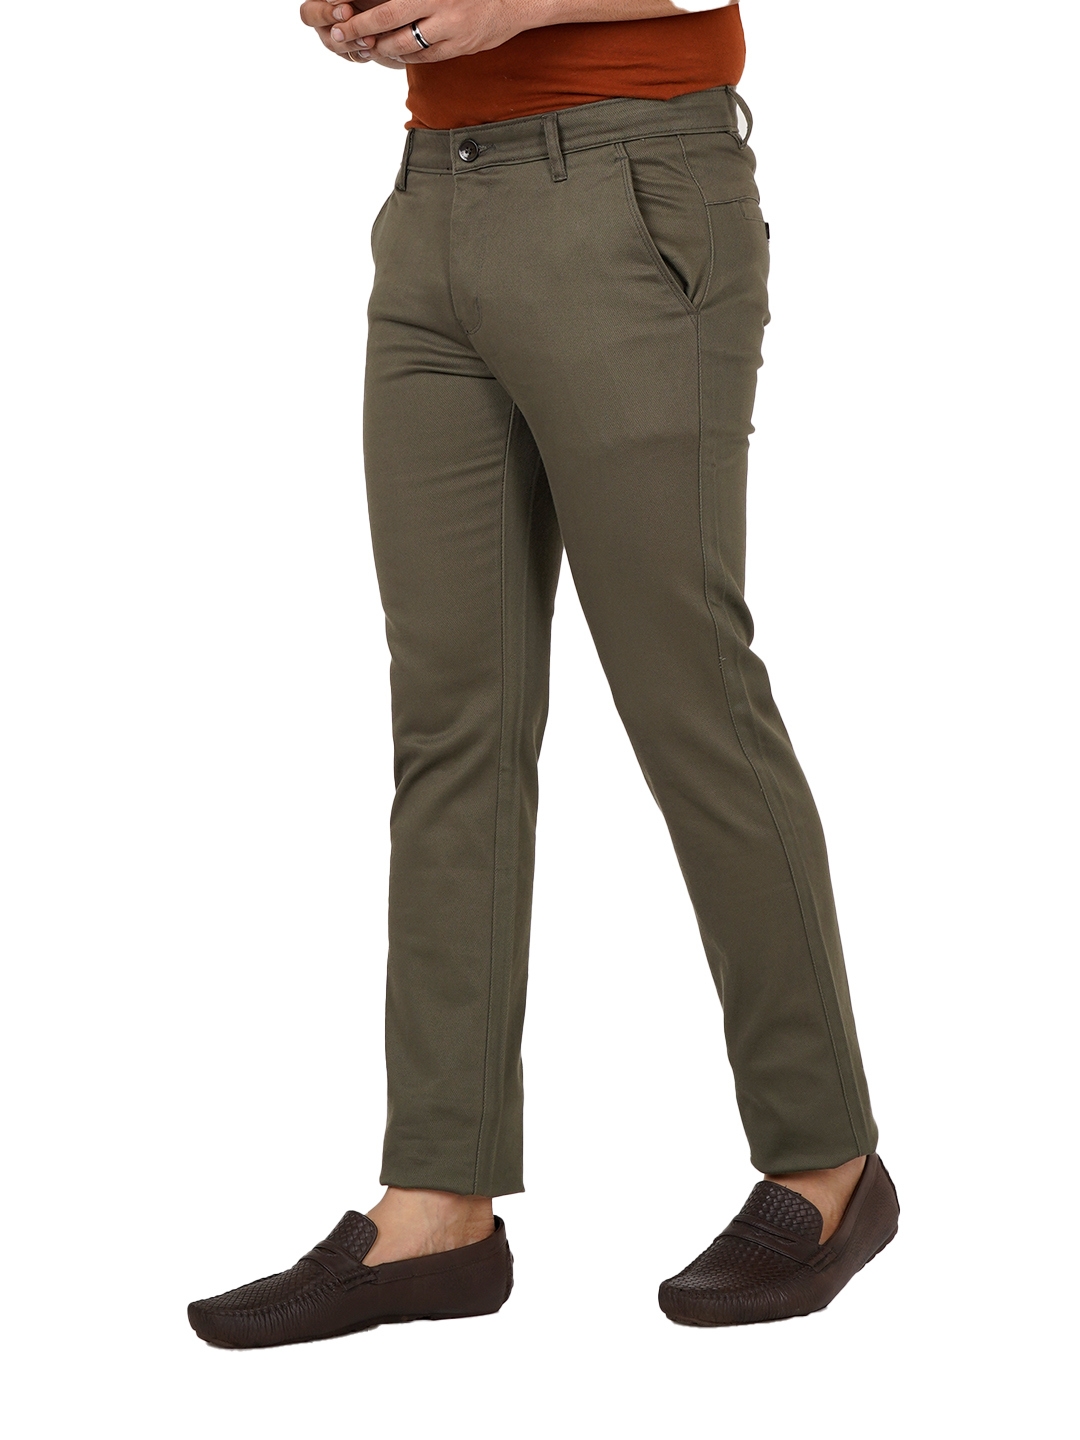 Buy Yellow and Olive Green Combo of 2 Women Trouser Cotton Flax Pants for  Best Price Reviews Free Shipping